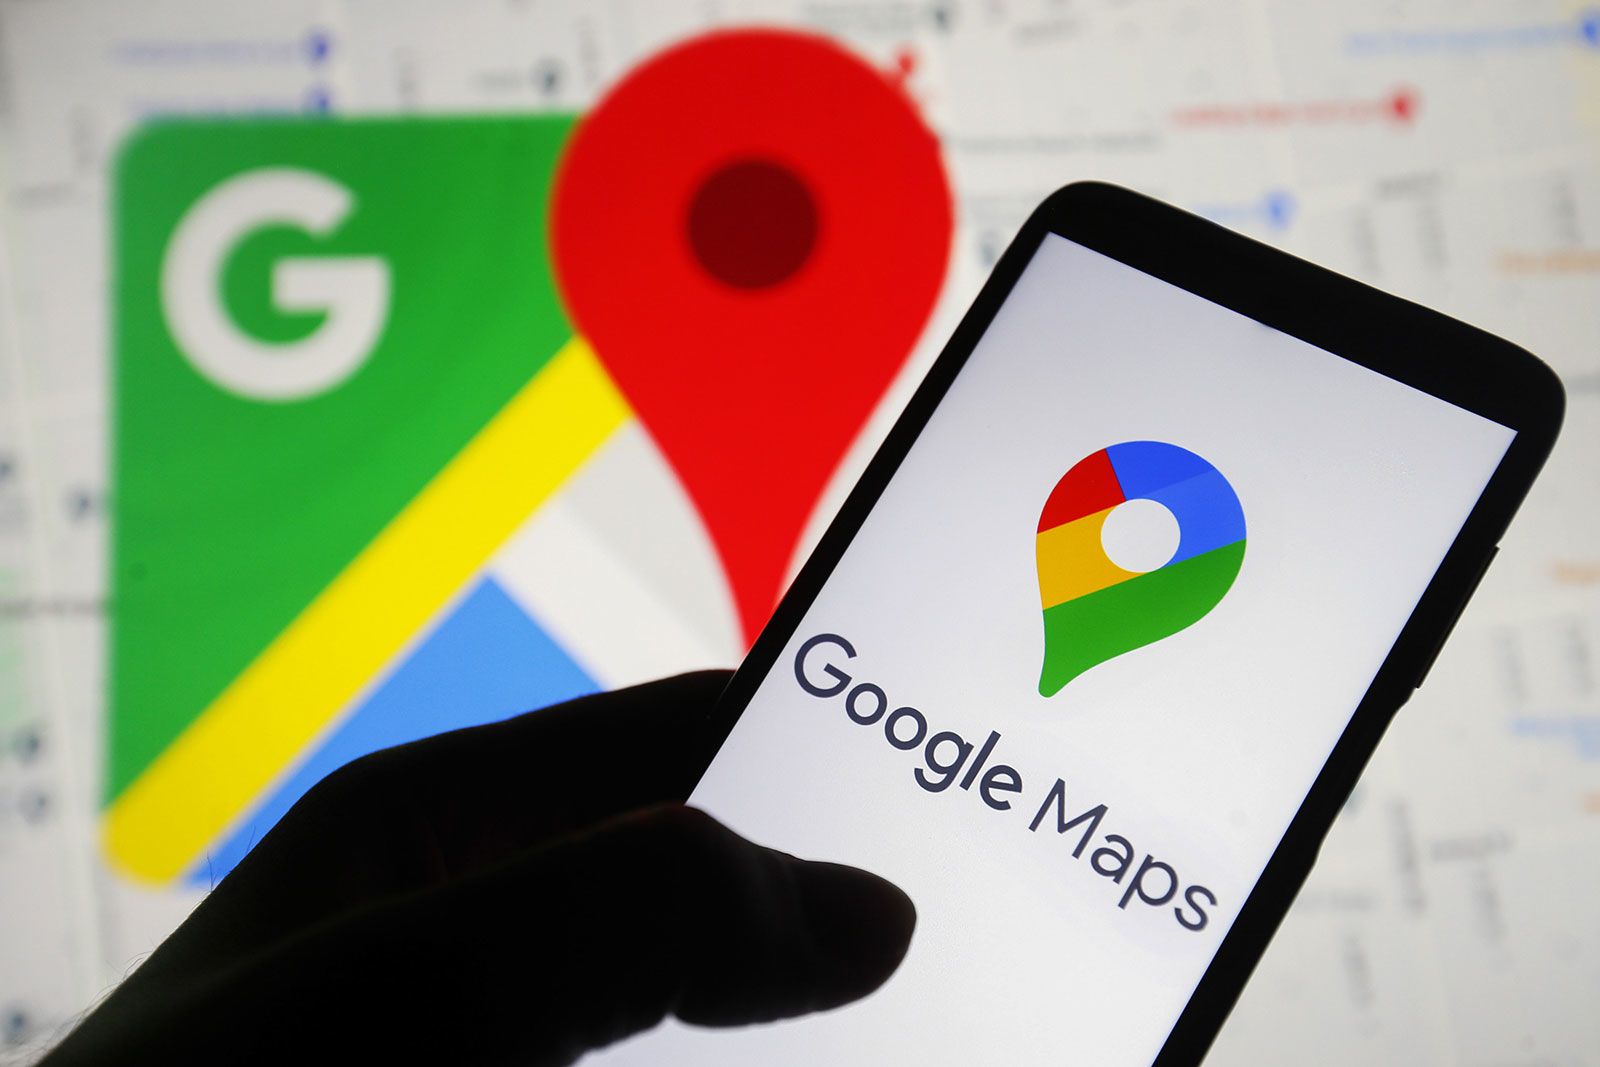 Google is temporarily disabling live traffic conditions on its mapping service apps, Google Maps an...